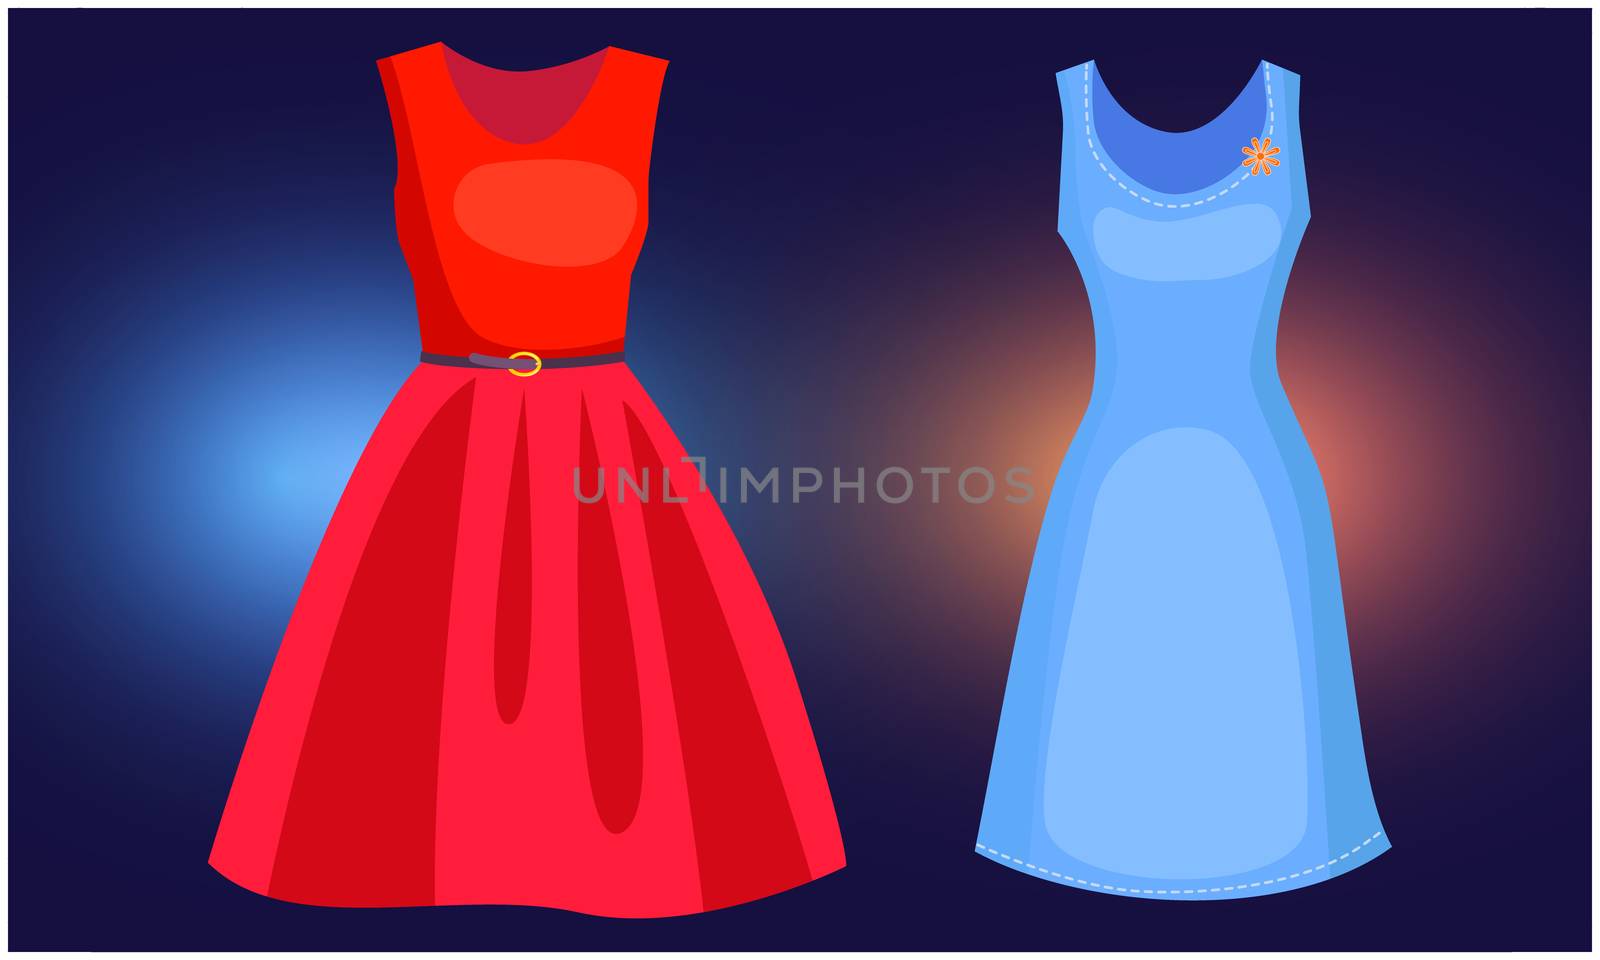 mock up illustration of female fashion wear on abstract background